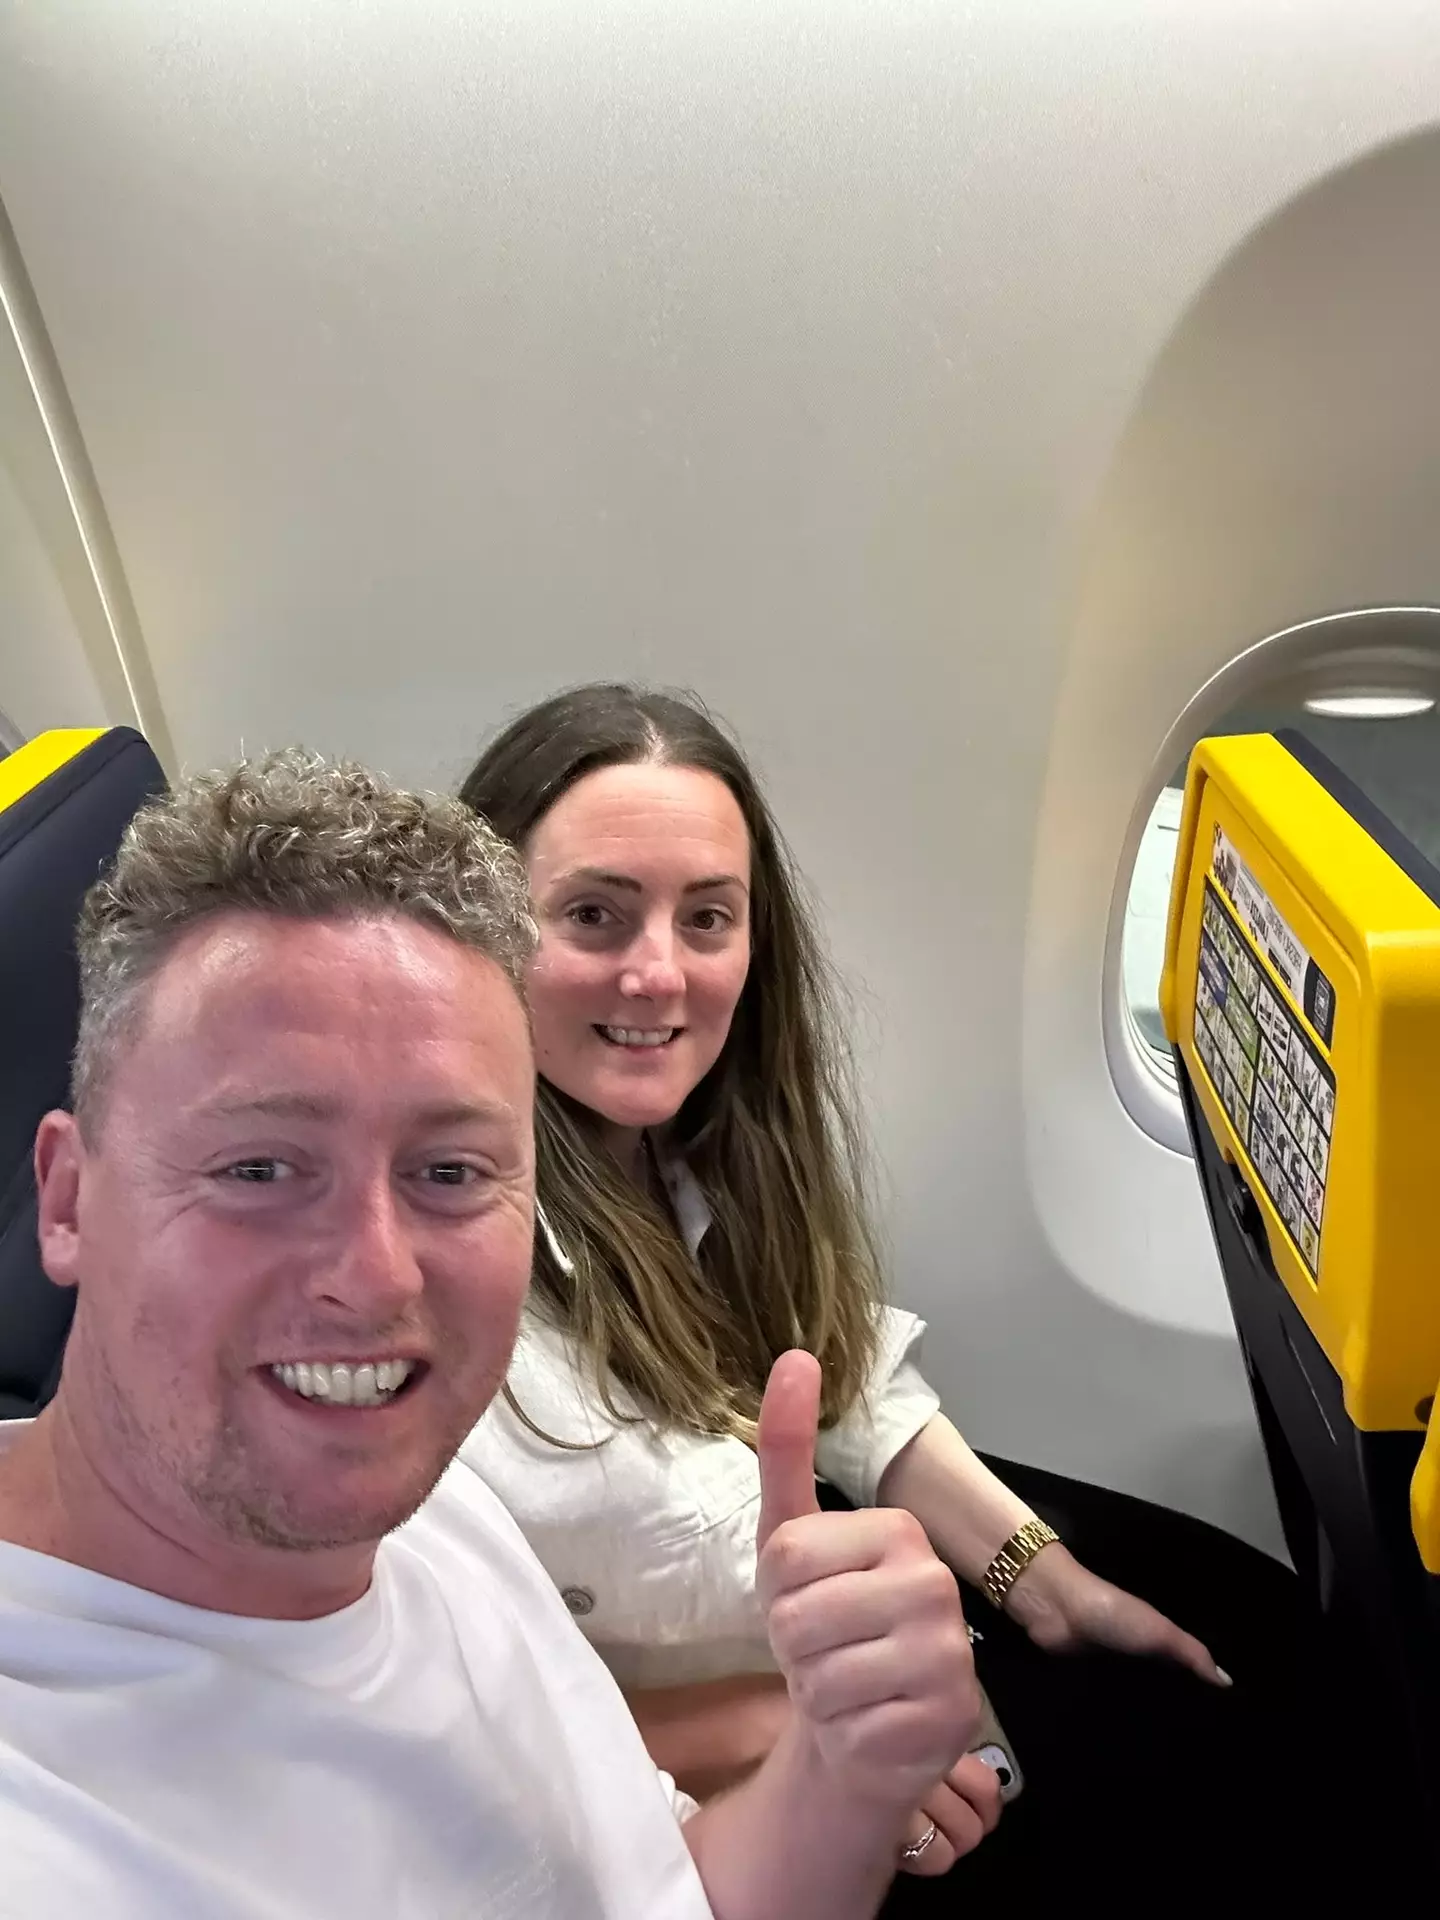 Ryanair remind customers that windows are not a guaranteed part of its flight experience.